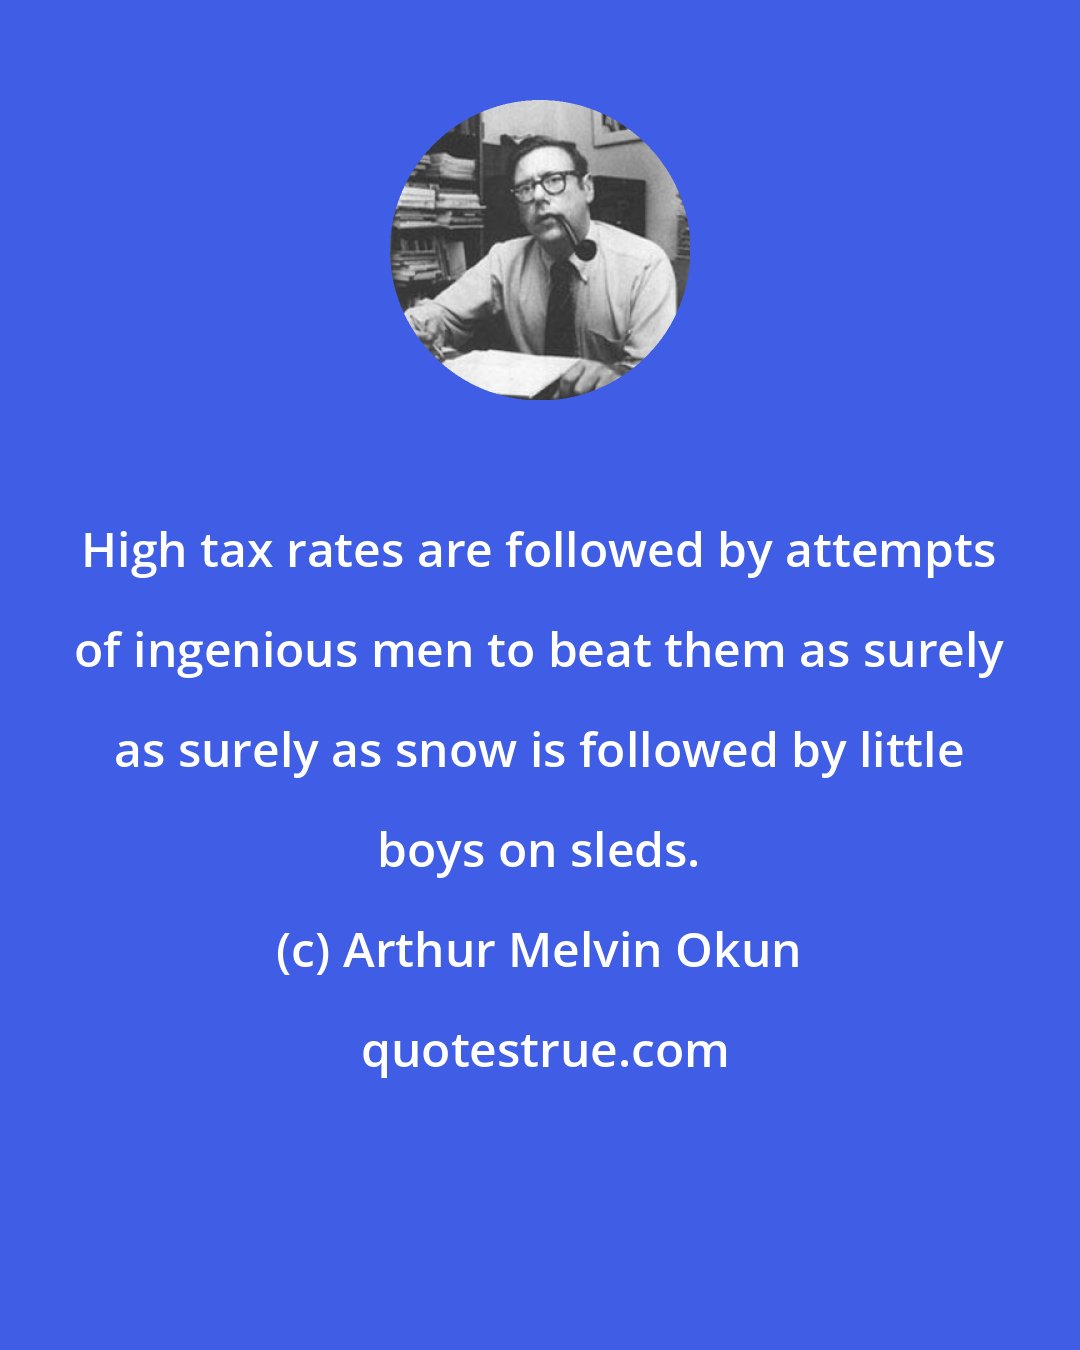 Arthur Melvin Okun: High tax rates are followed by attempts of ingenious men to beat them as surely as surely as snow is followed by little boys on sleds.